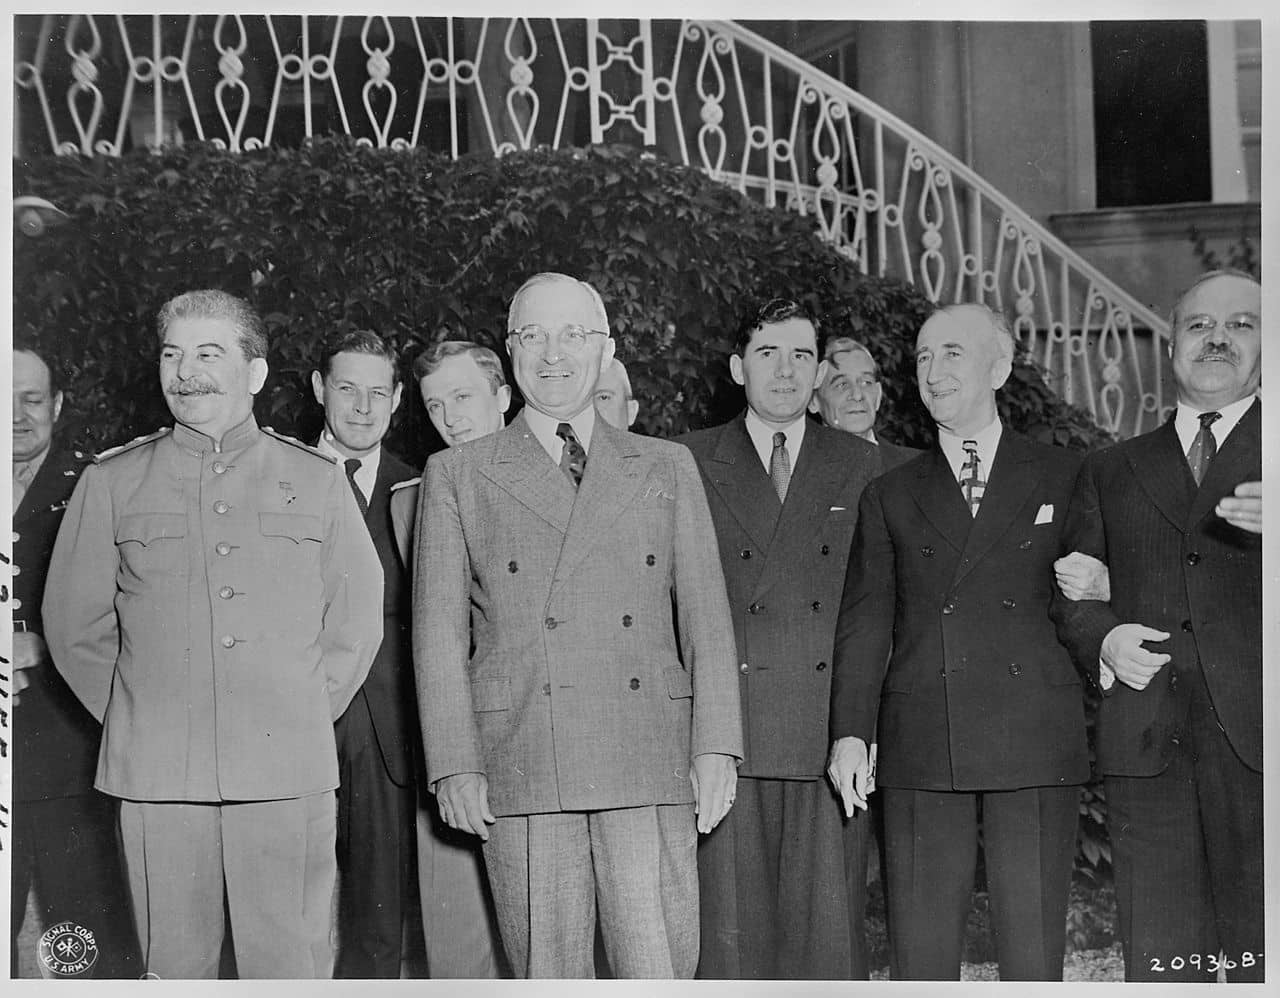 The Potsdam Conference - July 27th 1945 - Despite their professional disagreements, Byrnes and Molotov (right) would become quite close at the Potsdam Conference